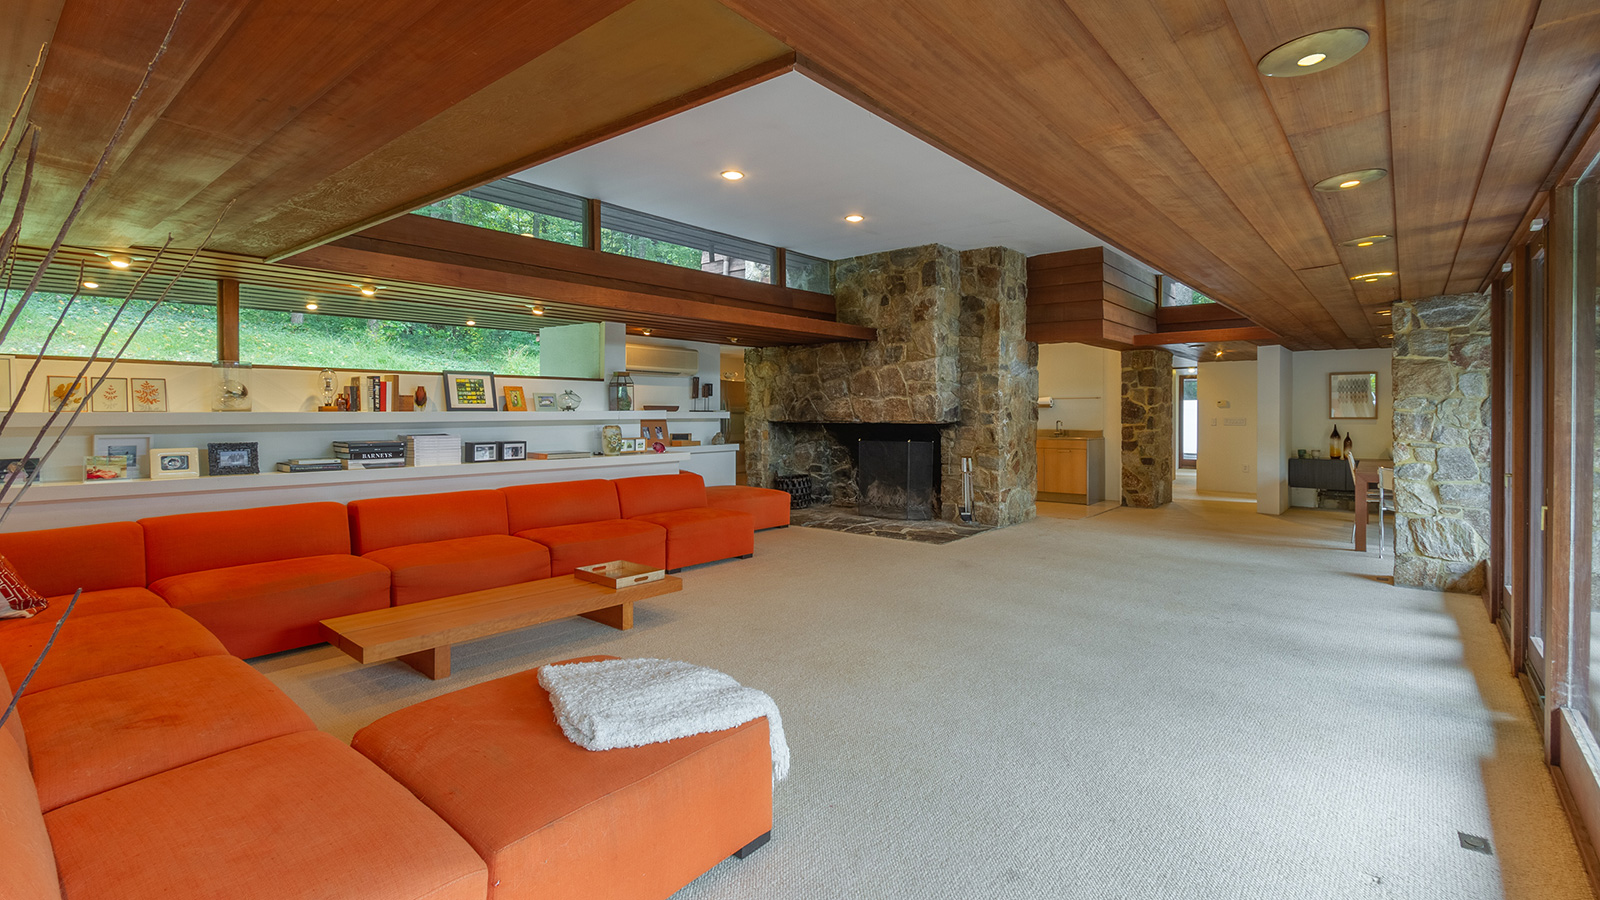 Five bedroom midcentury modern home by architect Allan J Gelbin is for sale in Connecticut